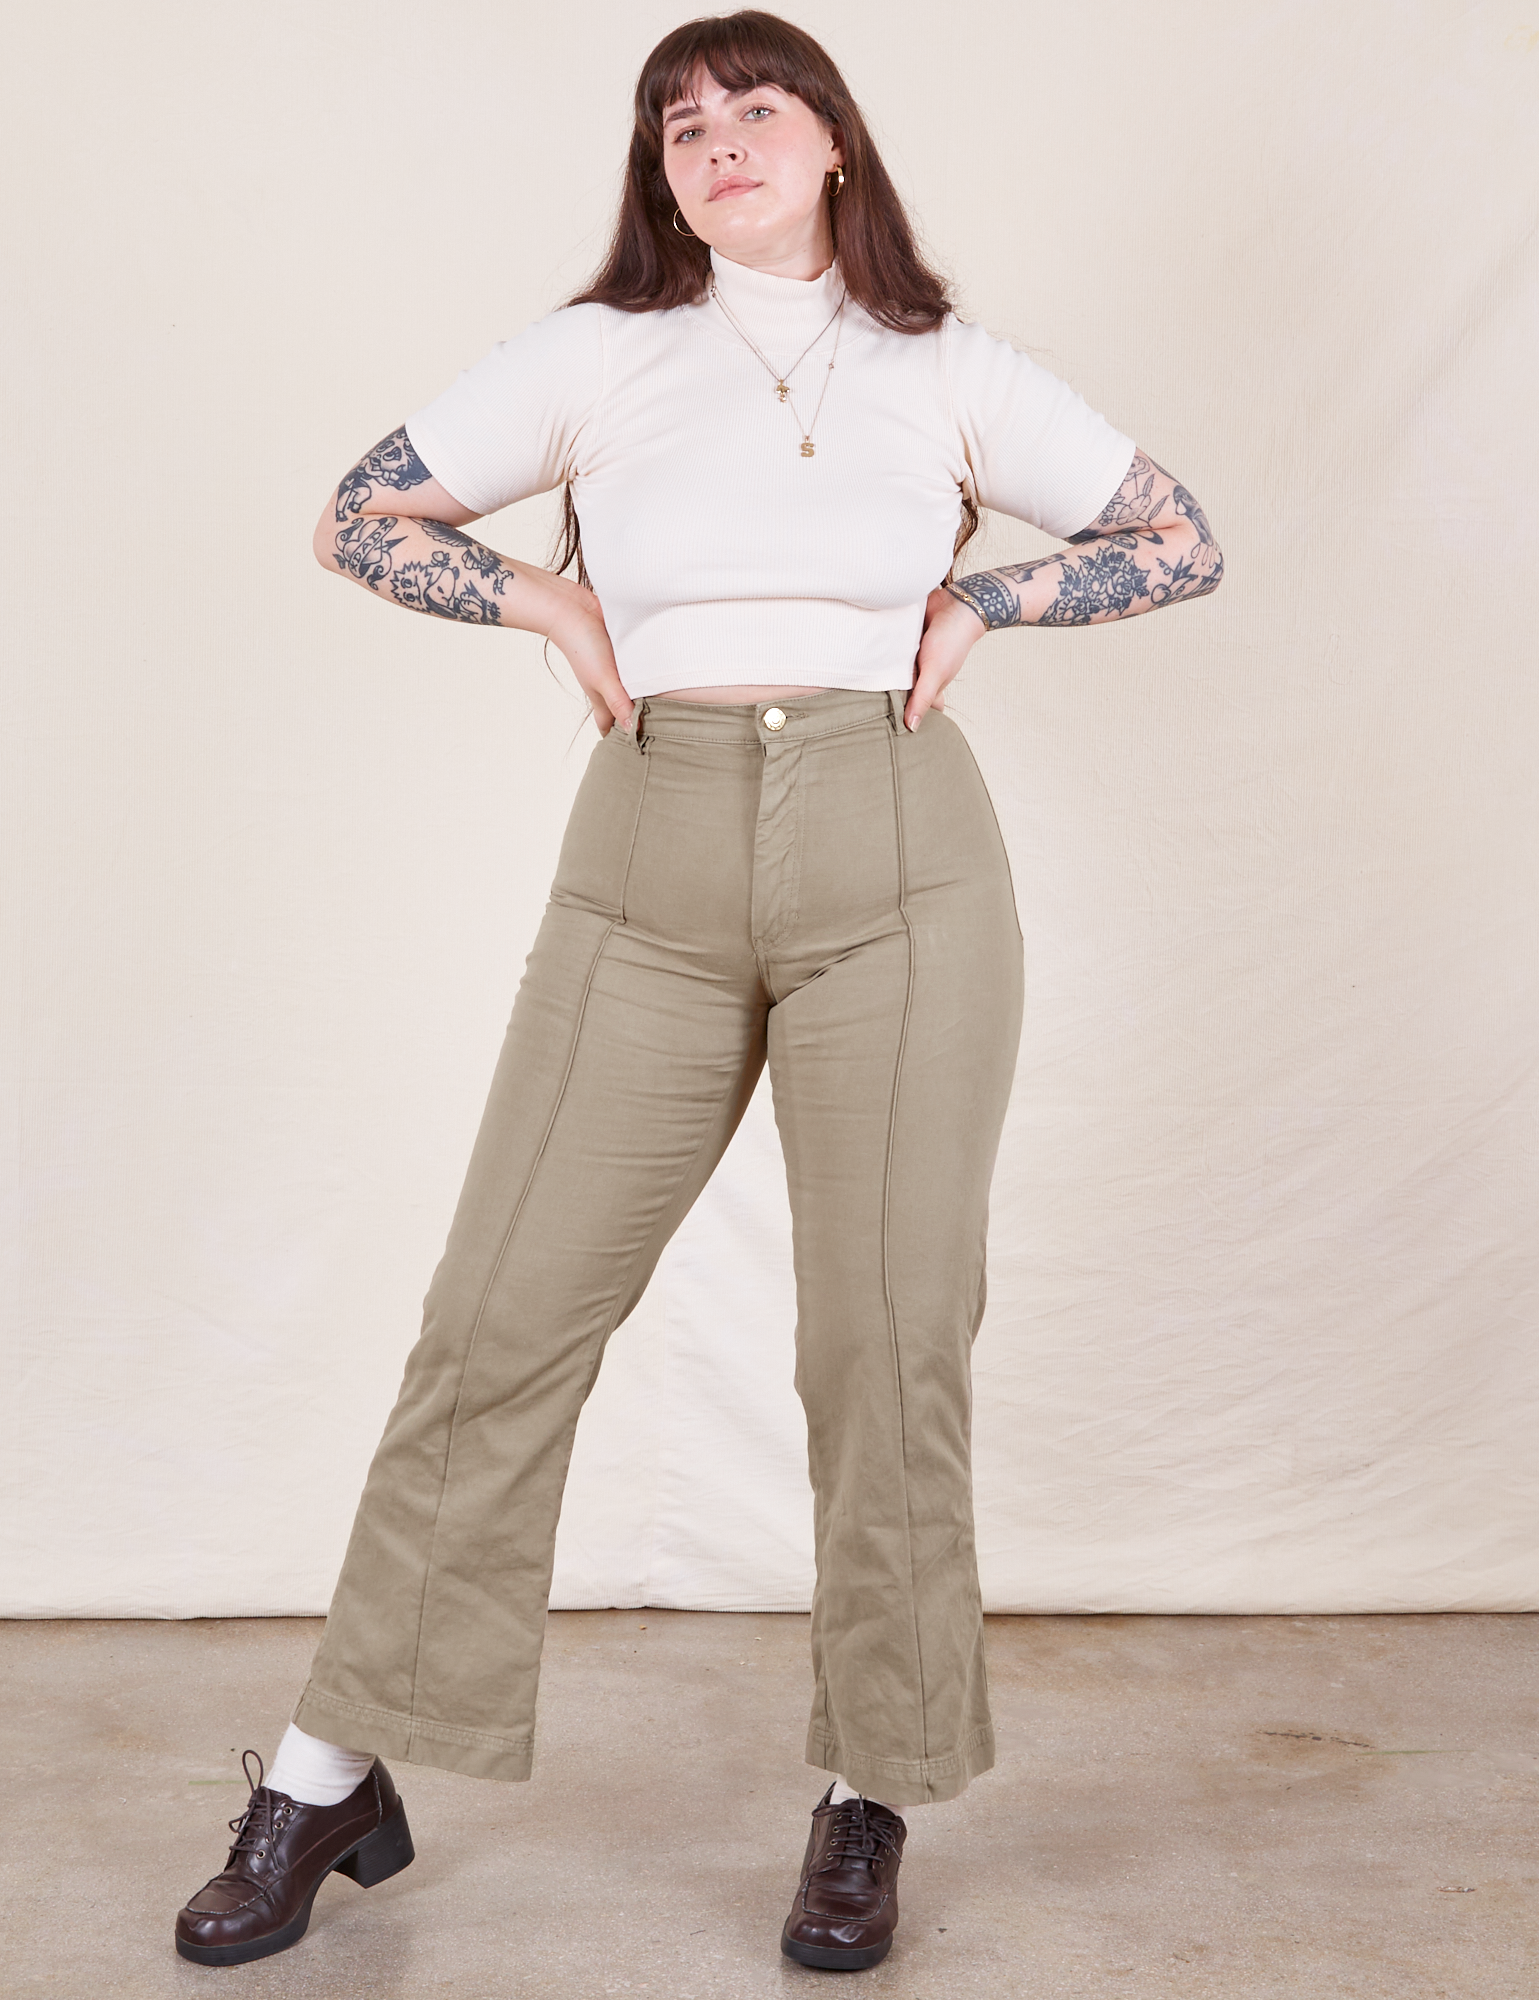 Sydney is 5&#39;9&quot; and wearing M Western Pants in Khaki Grey paired with a vintage off-white 1/2 Sleeve Turtleneck